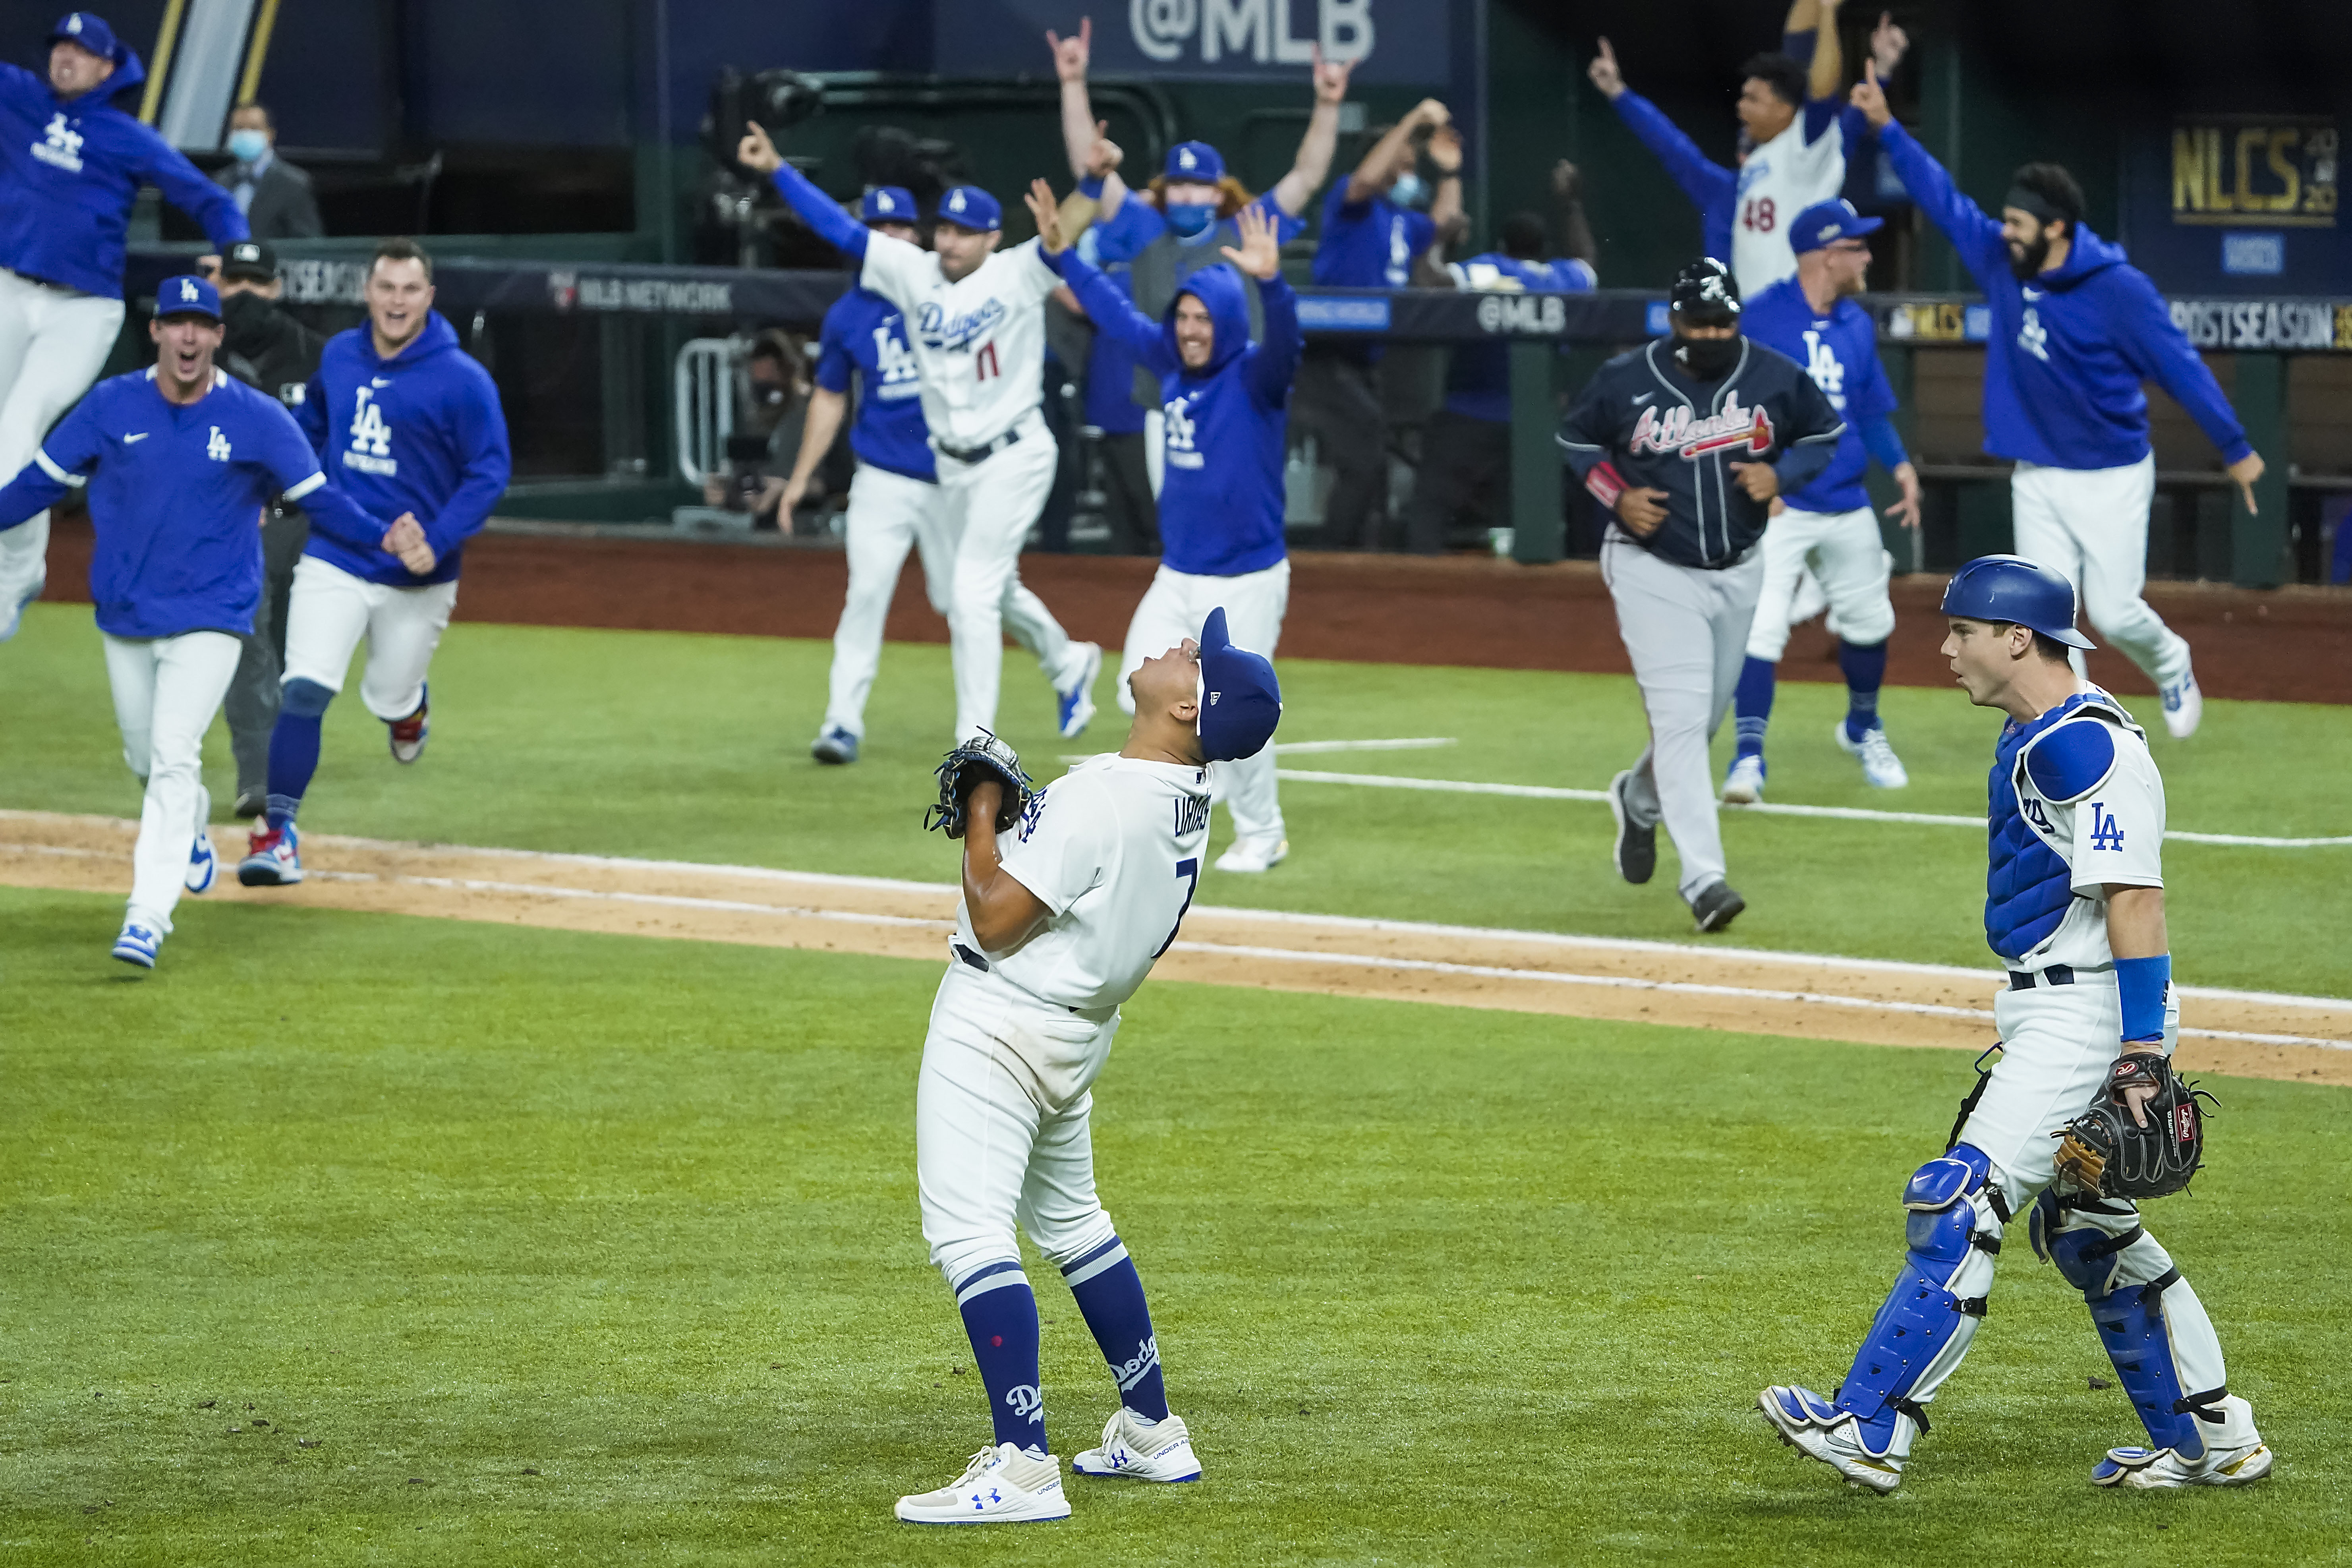 LA Dodgers eliminate Braves, setting up World Series duel with Tampa Bay  Rays in Arlington